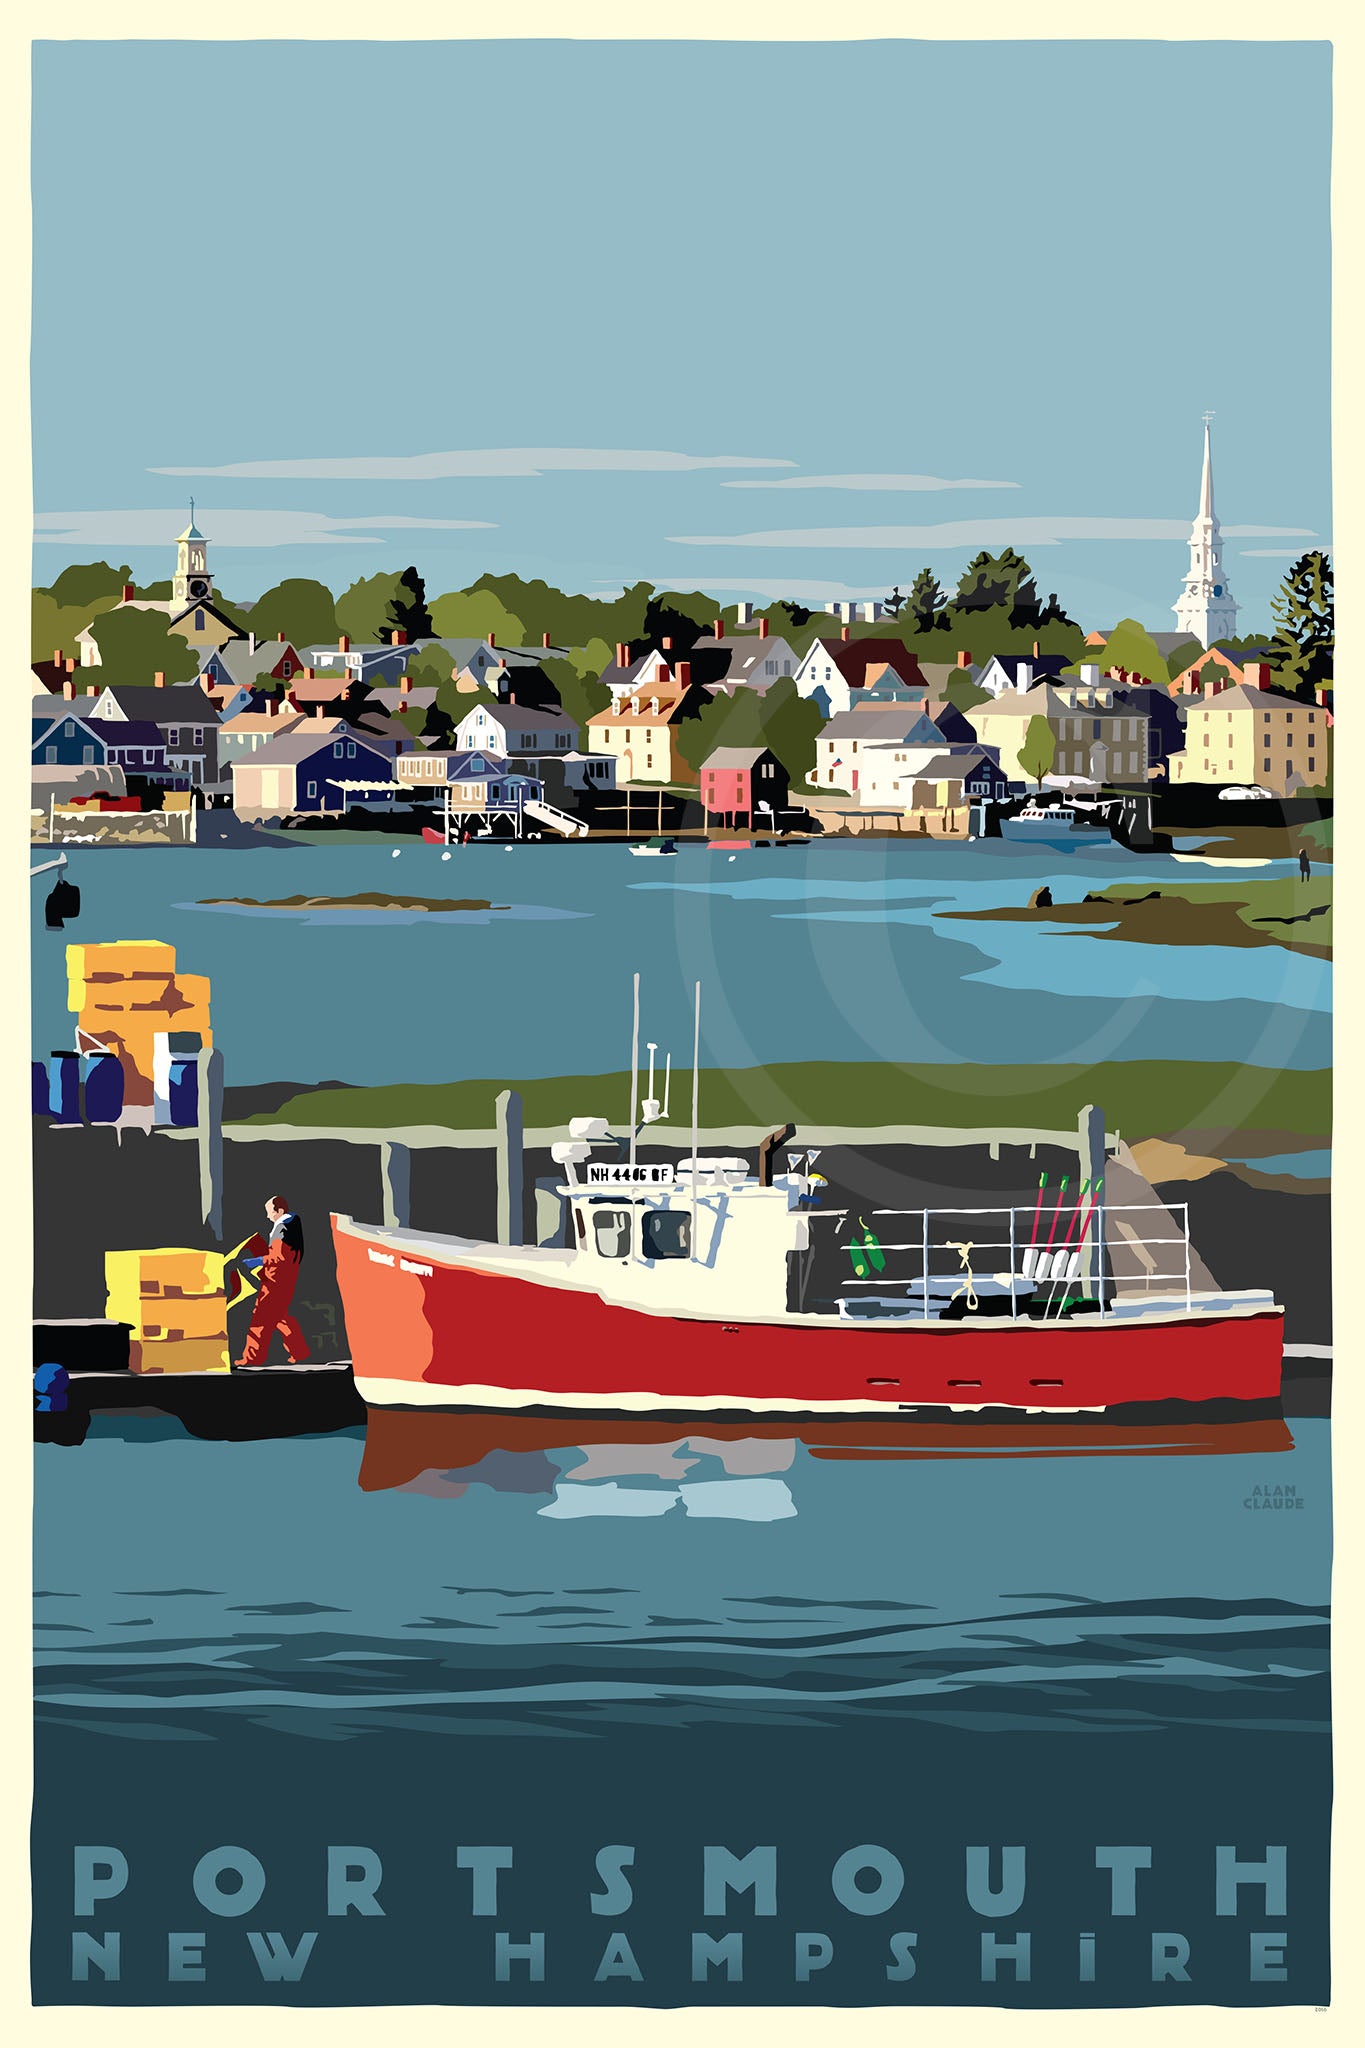 Portsmouth Lobster Boat Art Print 24" x 36" Travel Poster By Alan Claude - New Hampshire